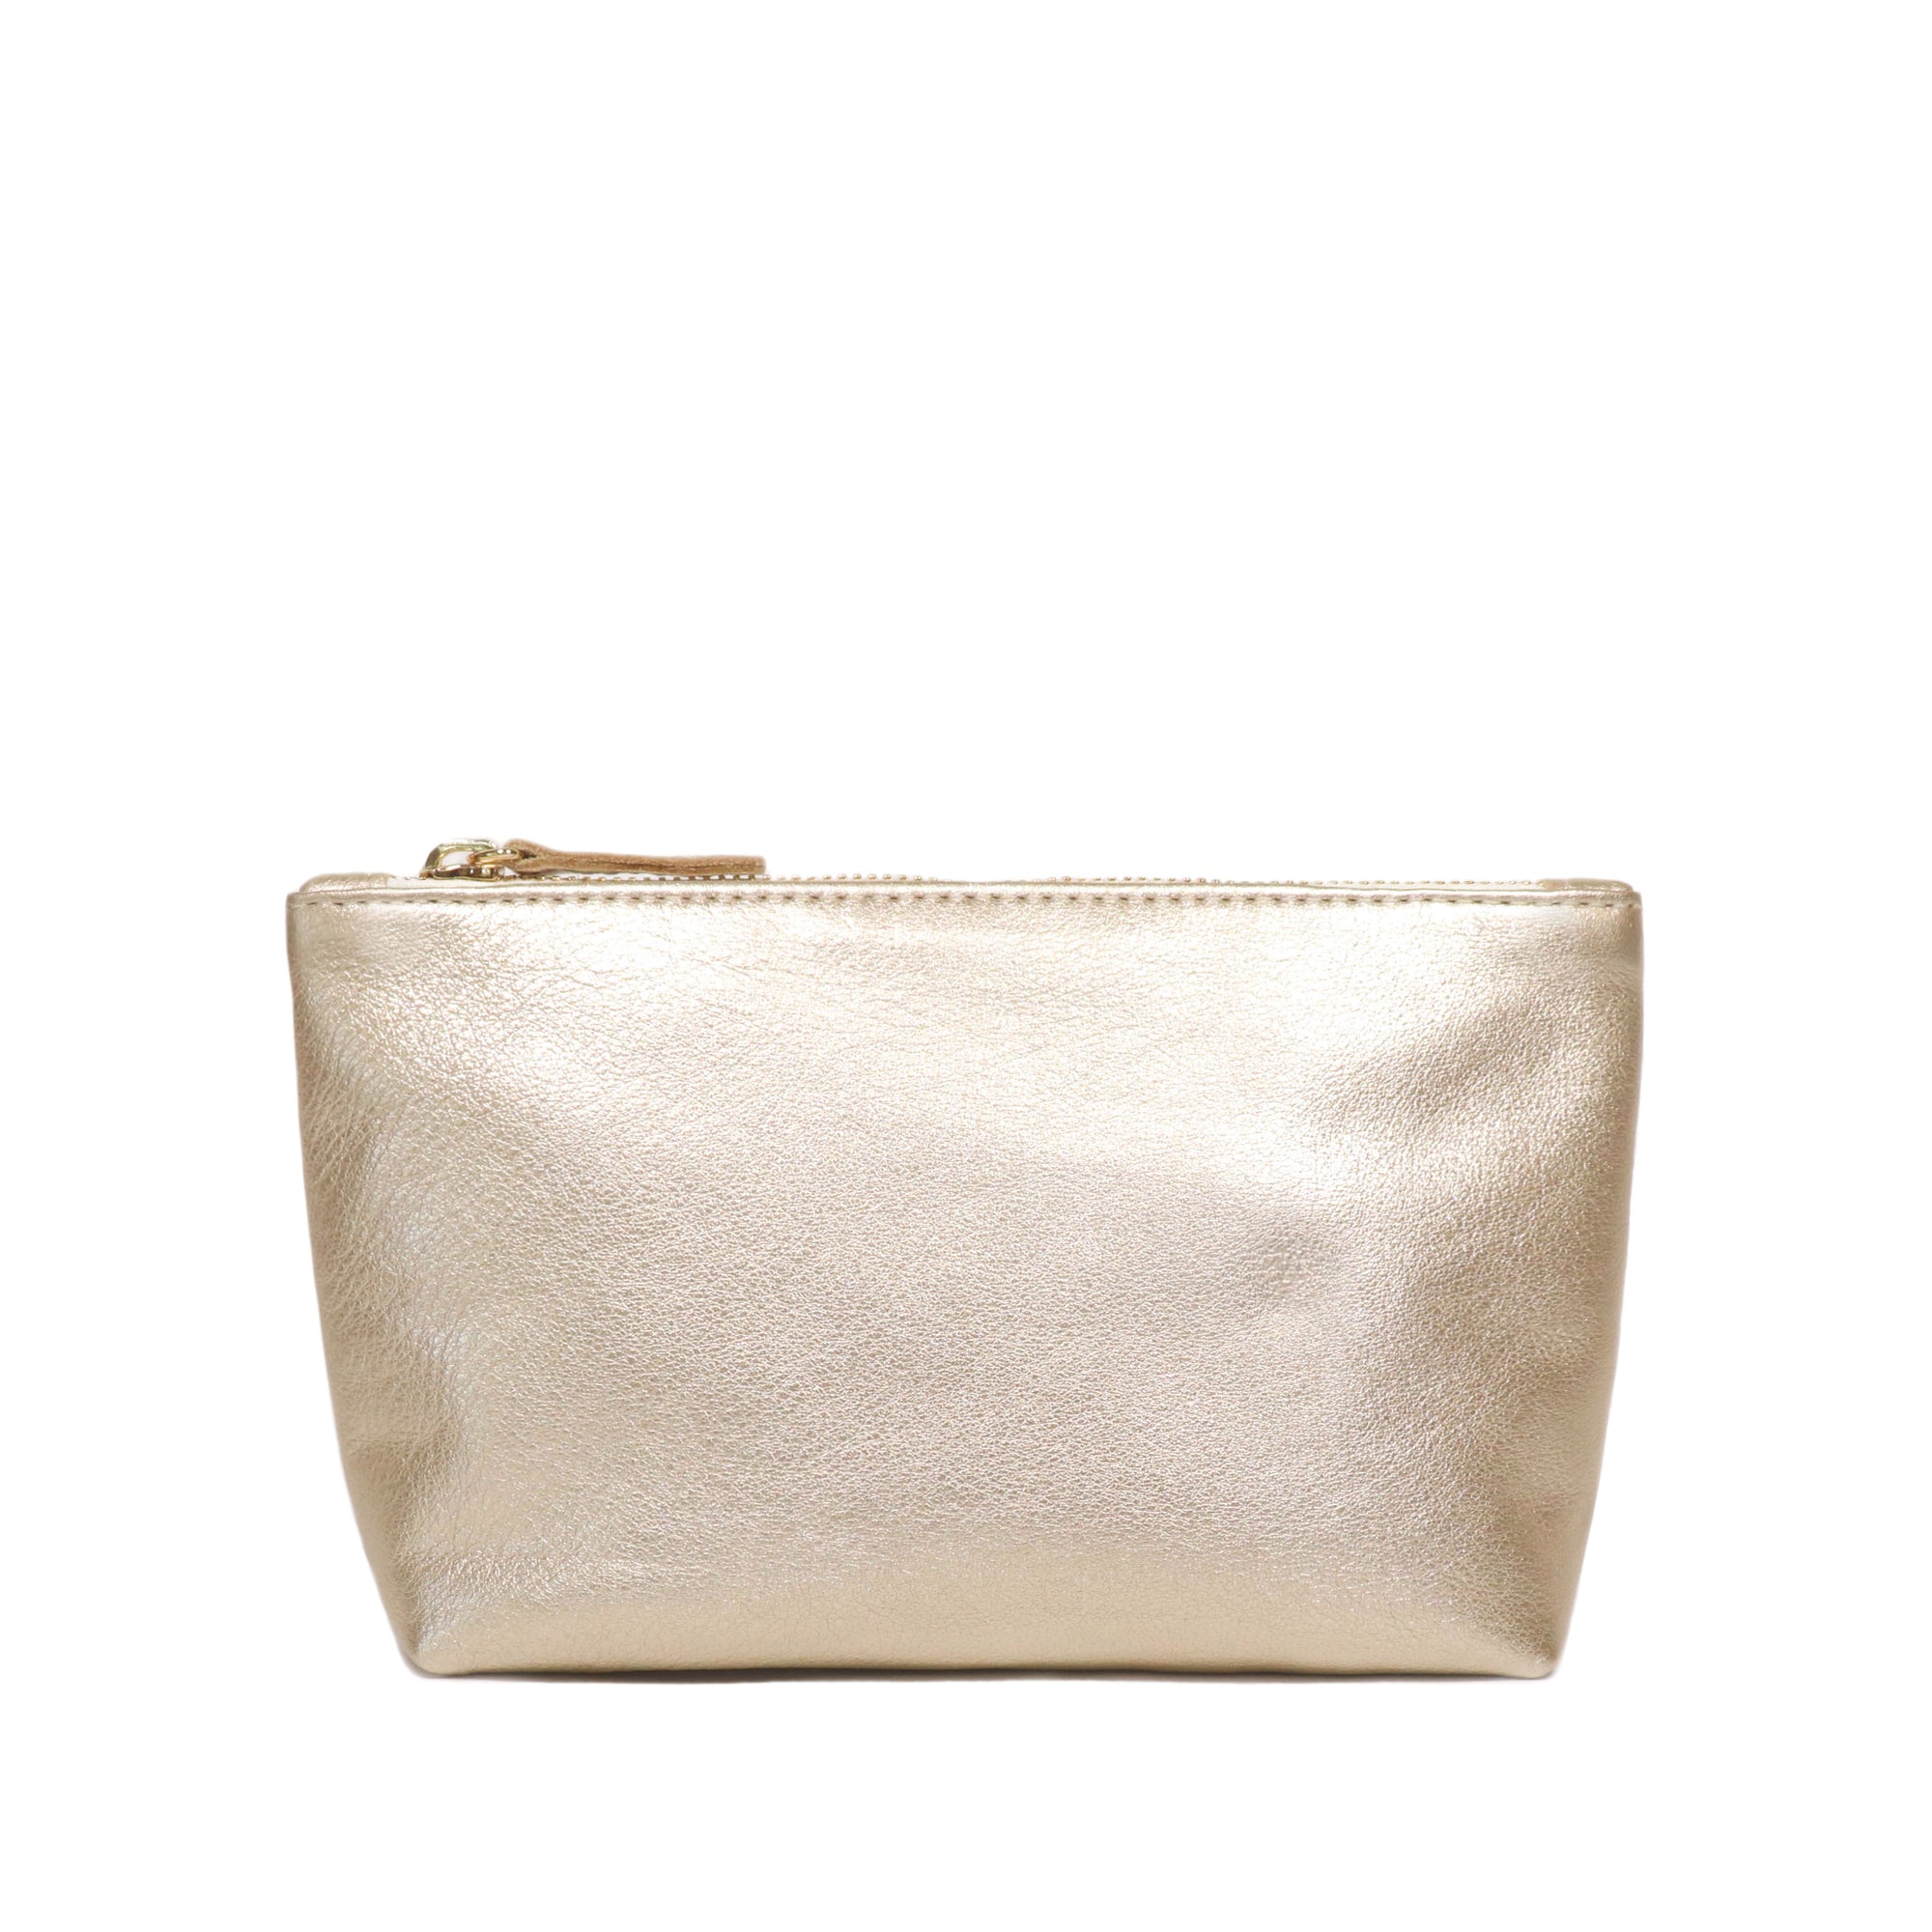 Napa Pouch - Leather zipper pouch in champagne metallic leather. Made in U.S.A. by Jana Kay.